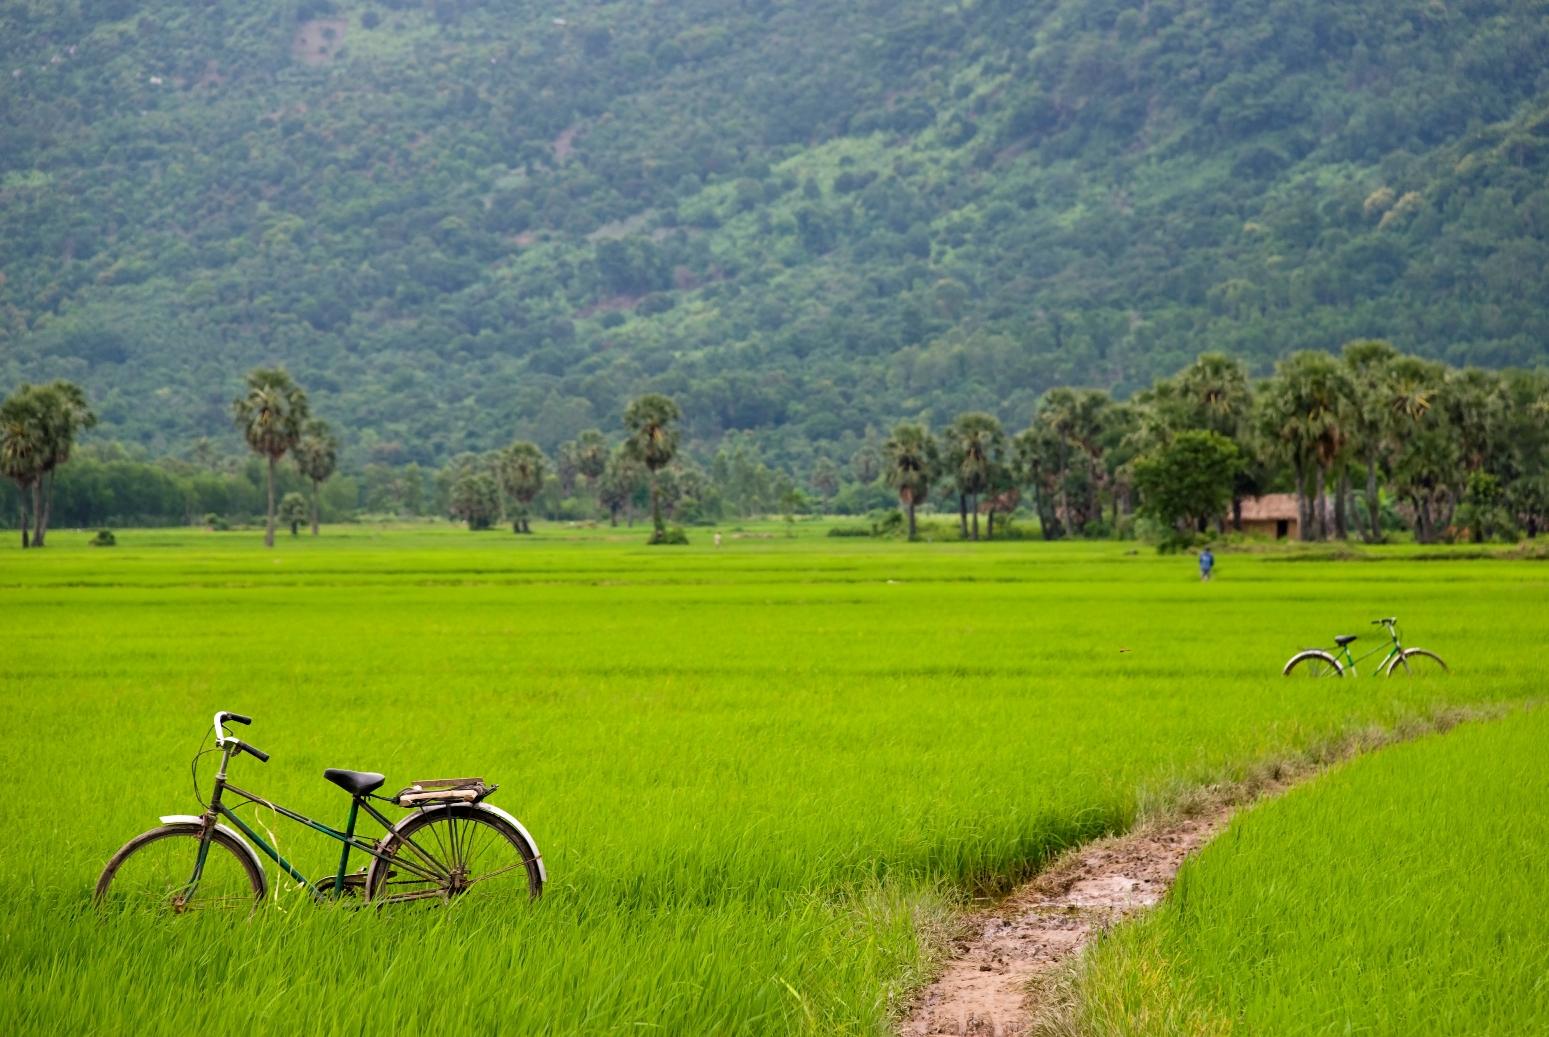 Bicycle in a paddyfield, Laos